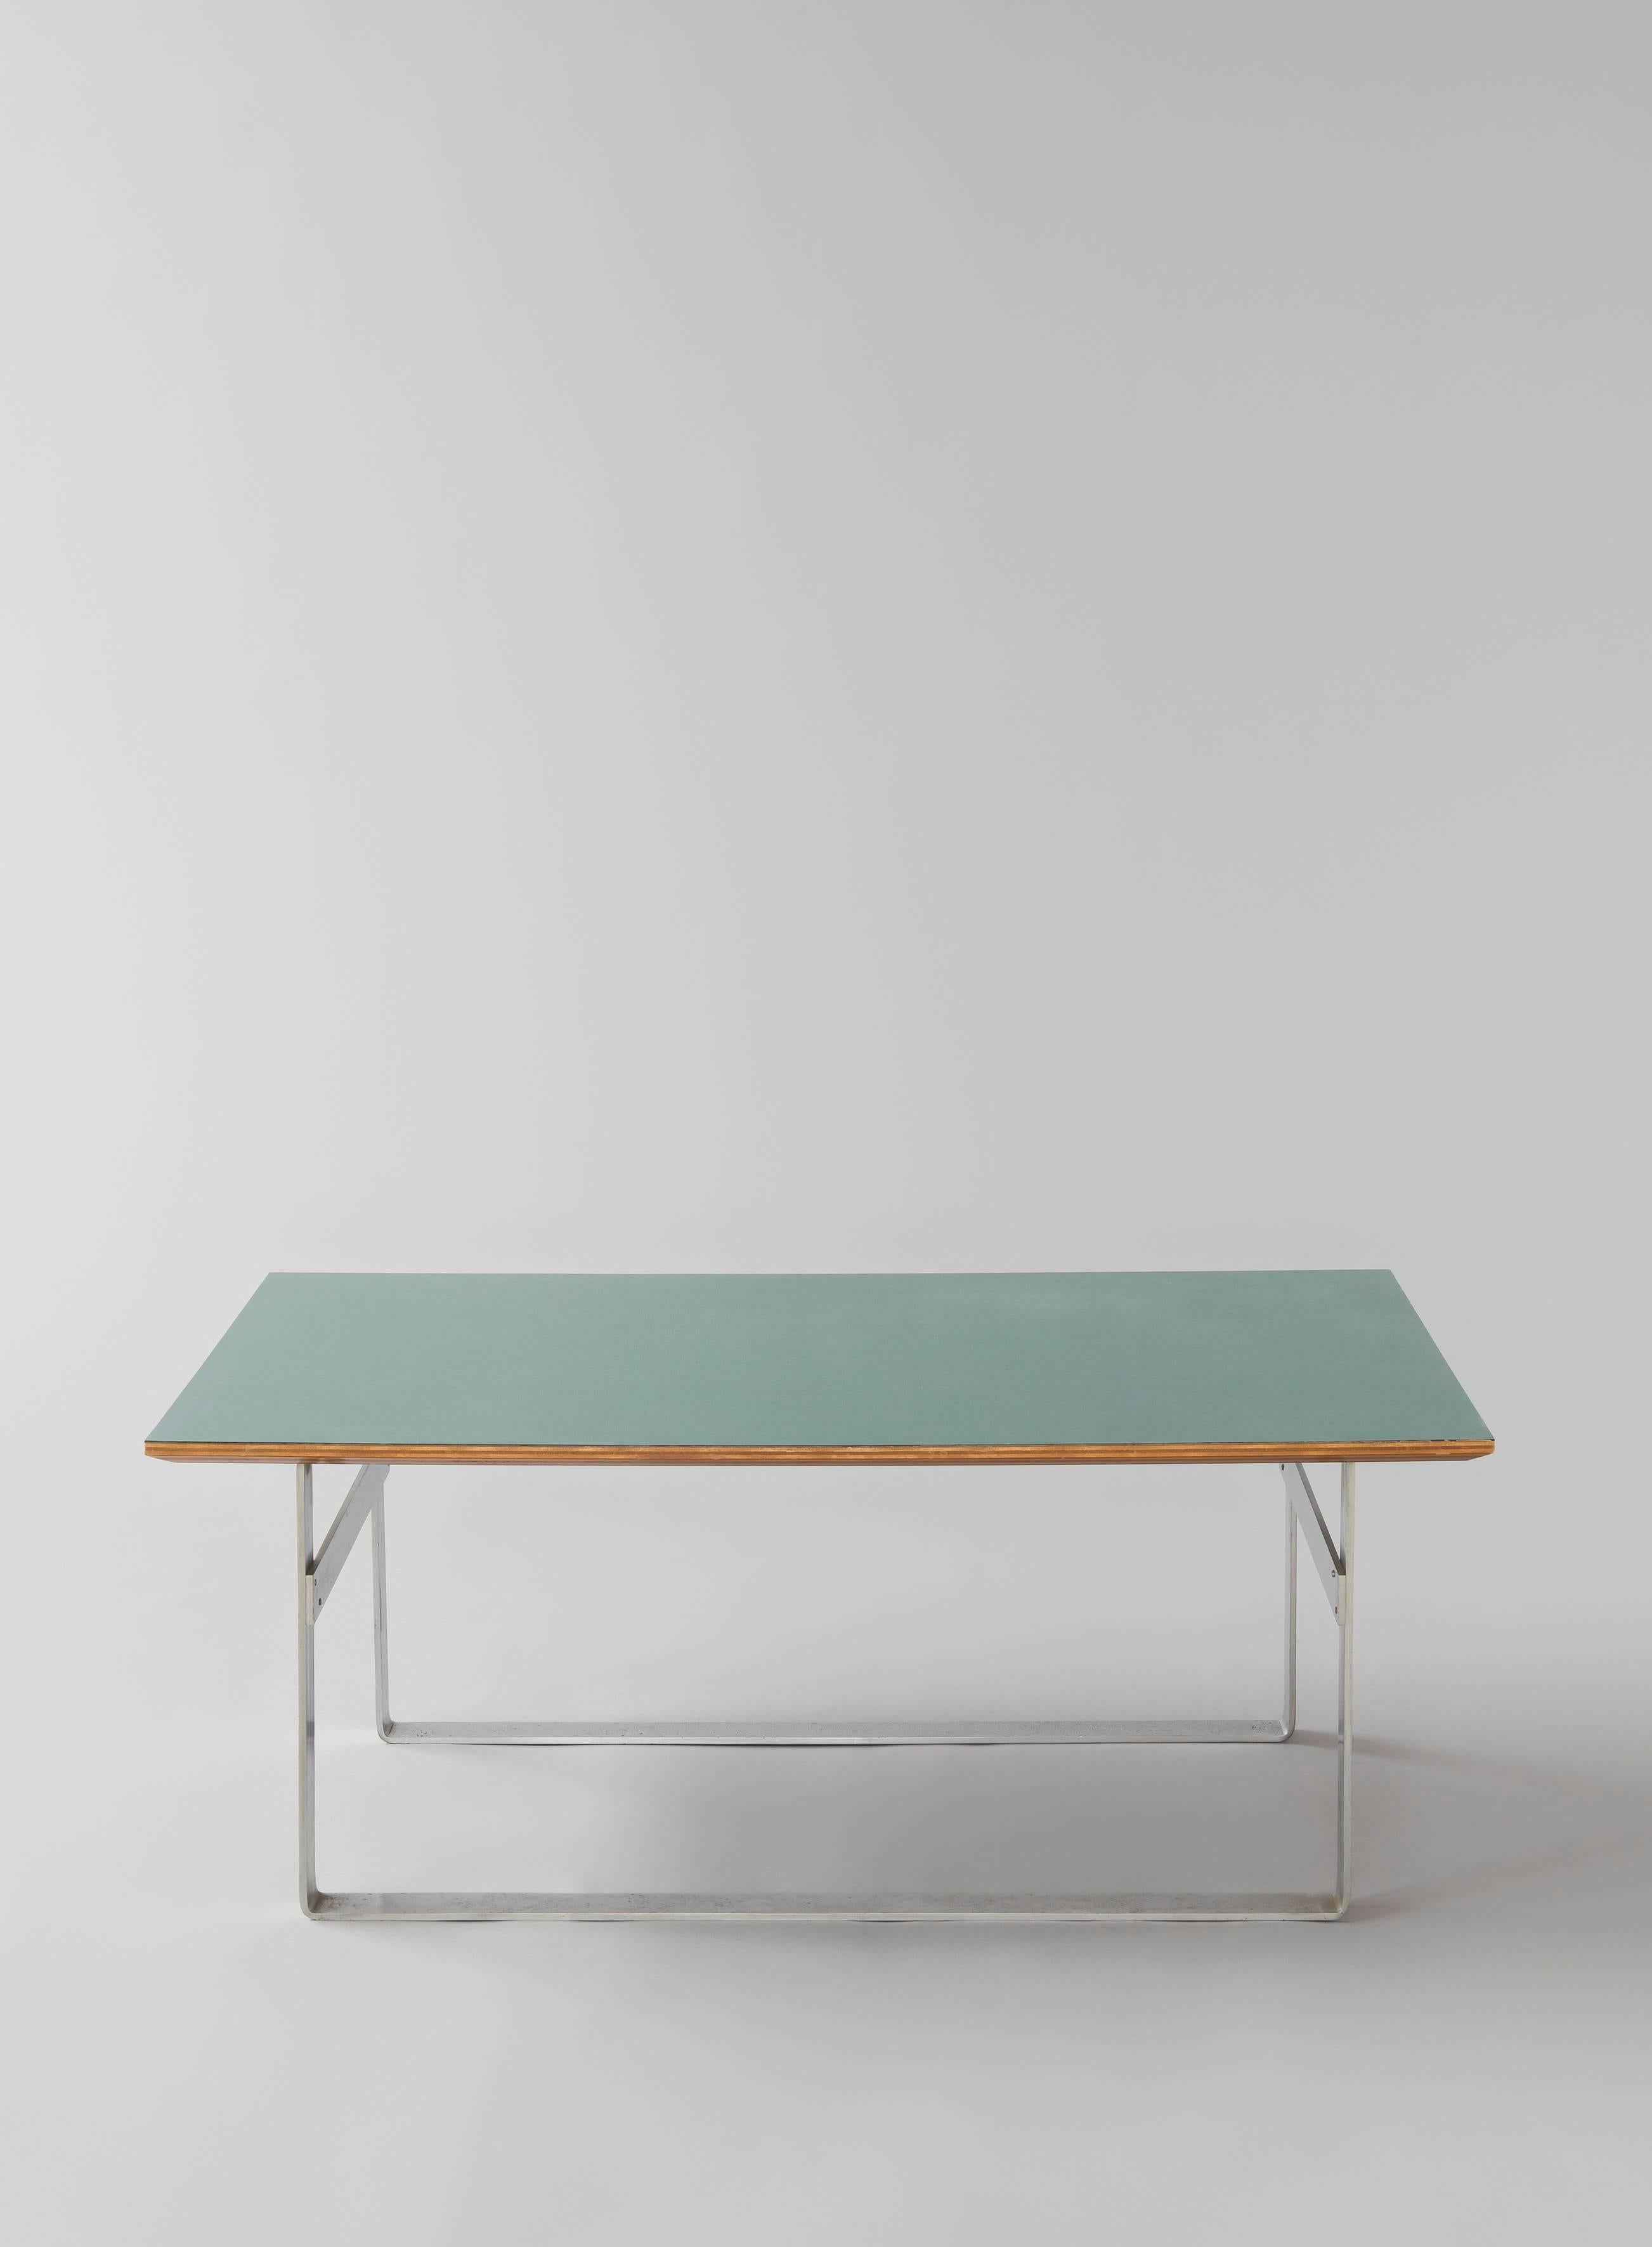 Low table prototype by André Simard (1927-) - 1958

Documentation: Archives André Simard